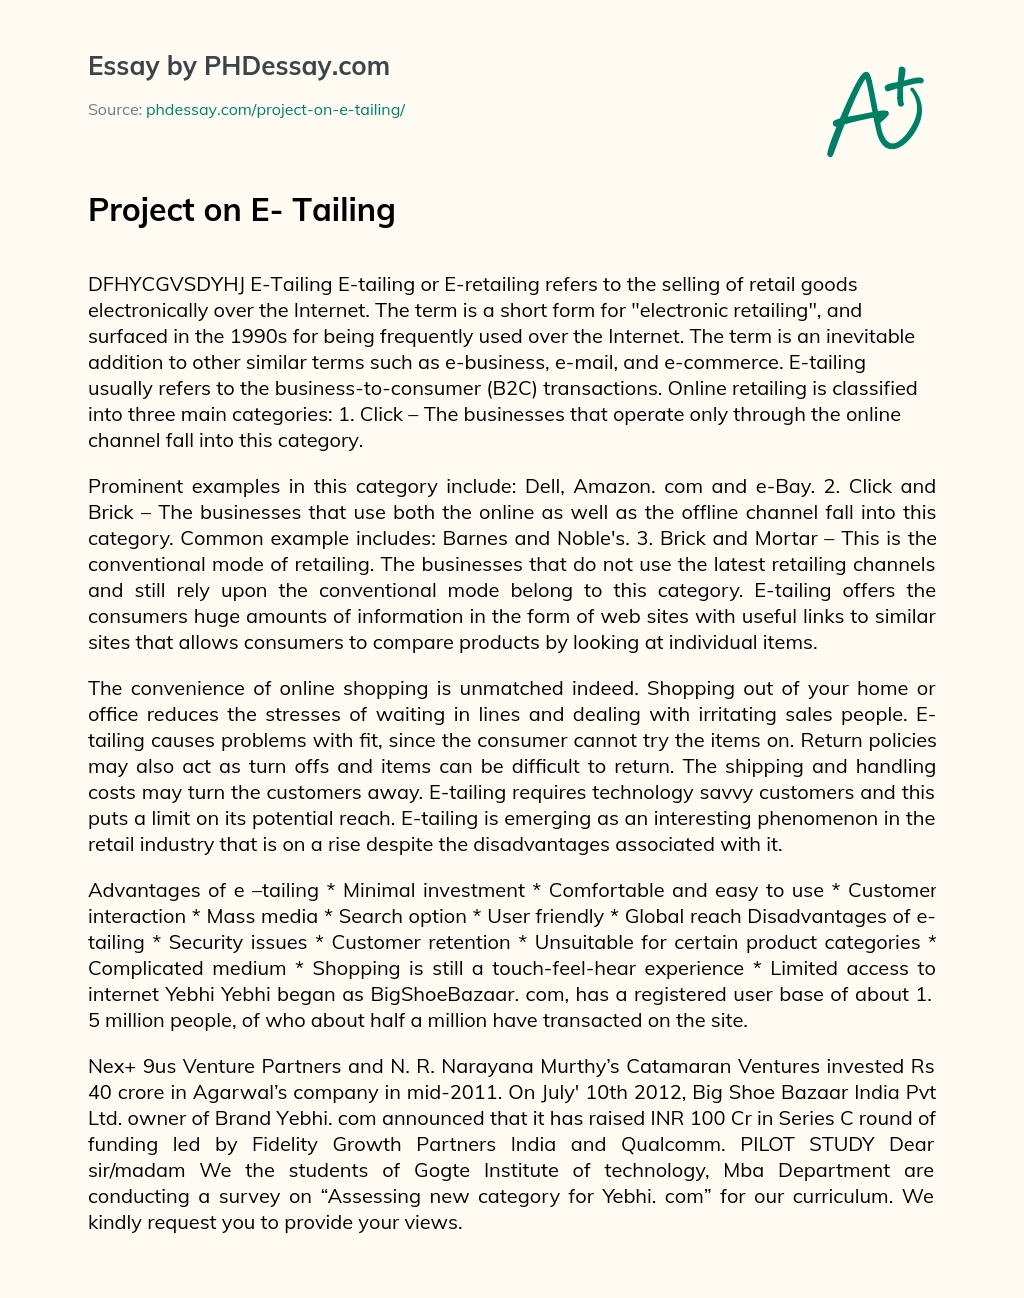 Project on E- Tailing essay